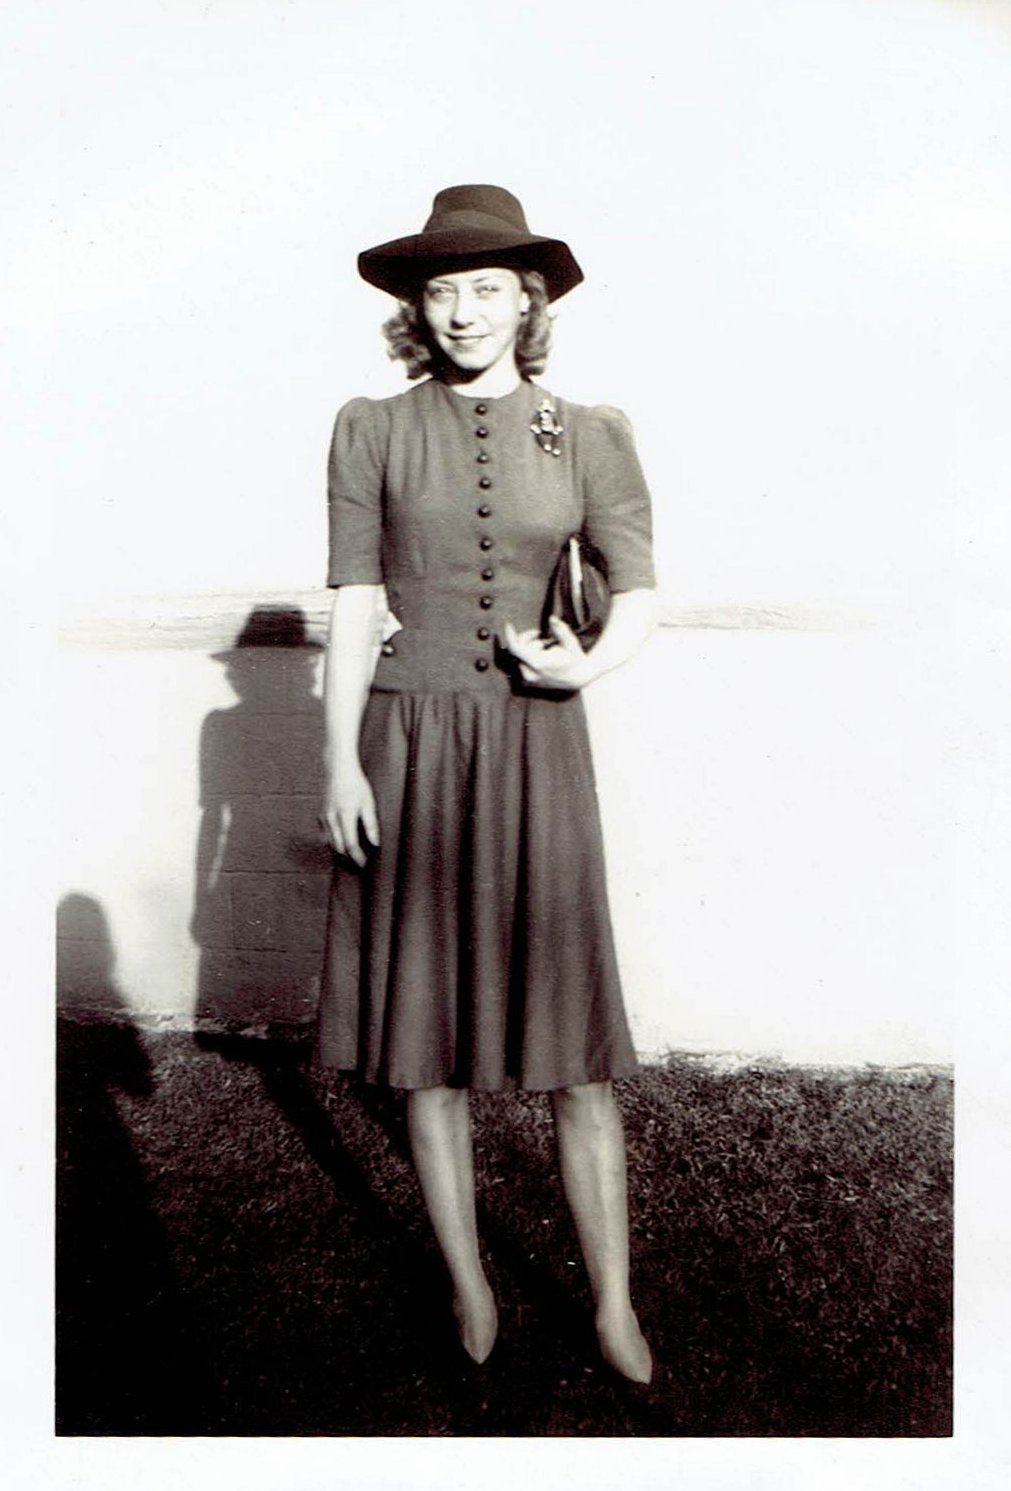 What Did Women Wear in the 1940s? Here Are 40 Vintage Snapshots Show  Everyday 1940s Women's Fashions ~ Vintage Everyday